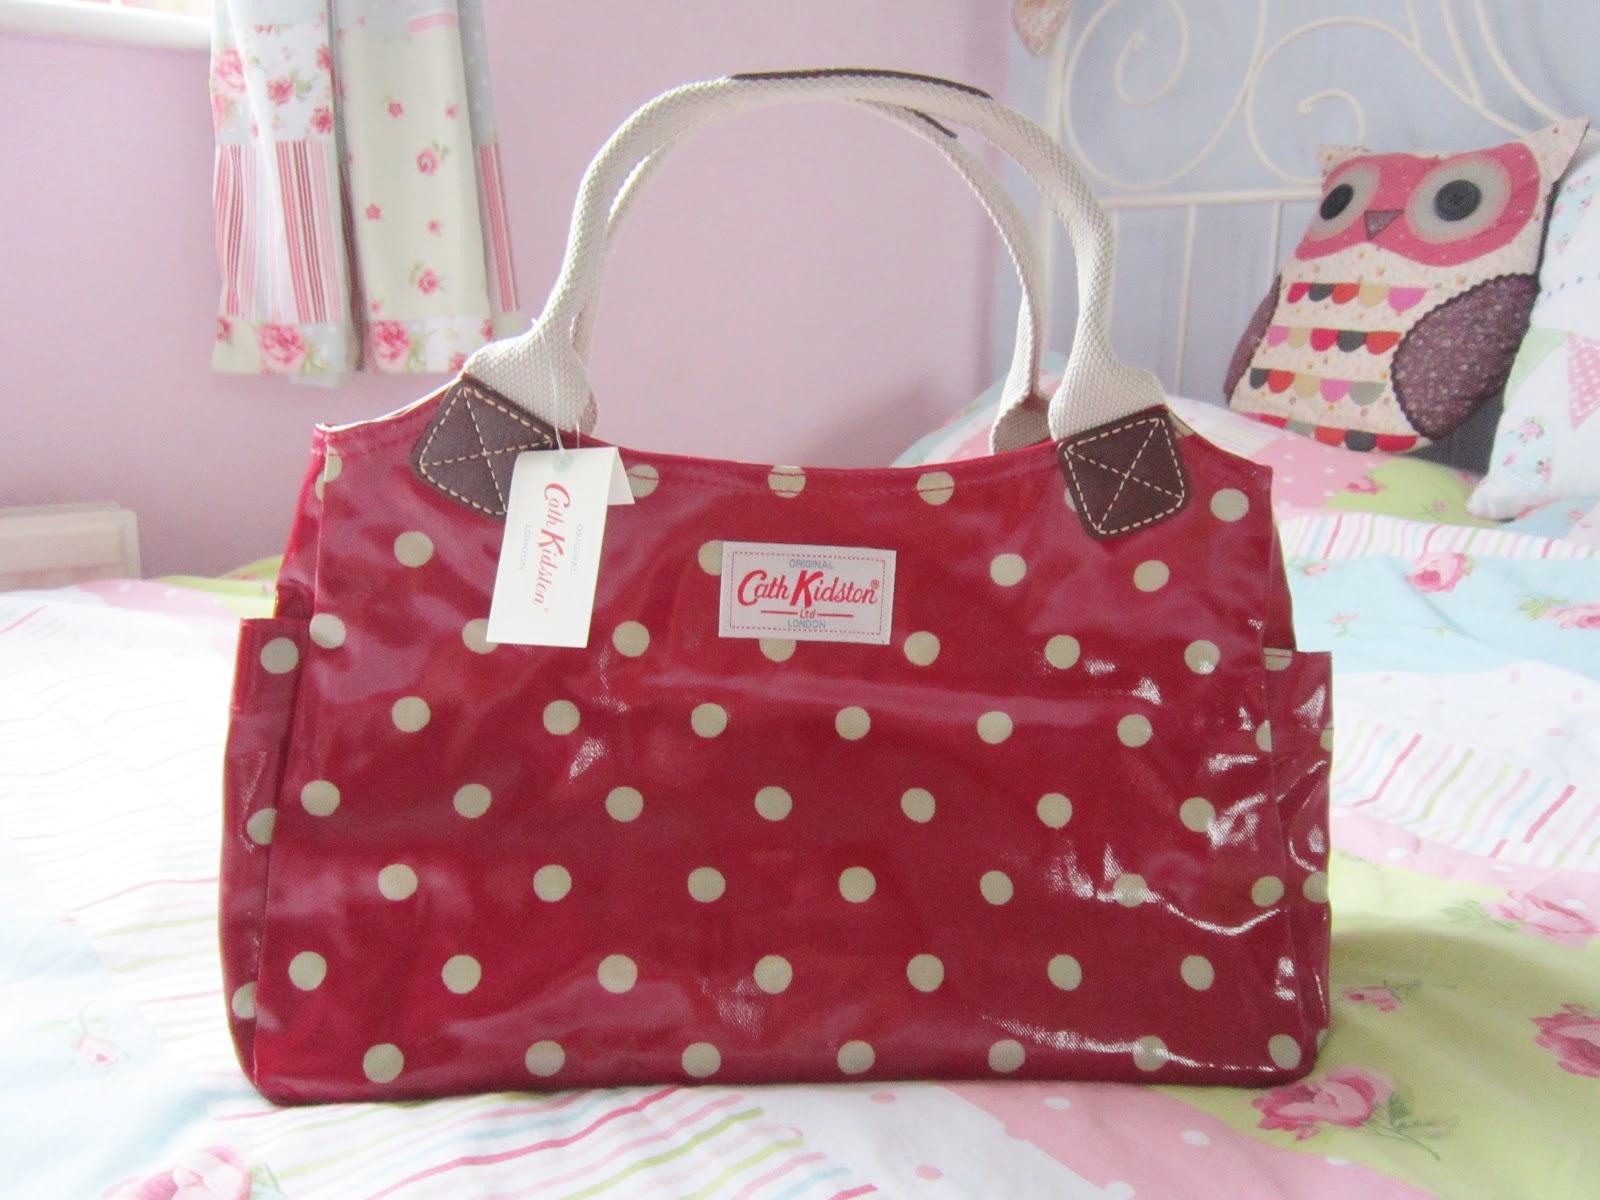 My New Cath Kidston Spot Berry Day Bag ♥ - Victoria's Vintage Blog